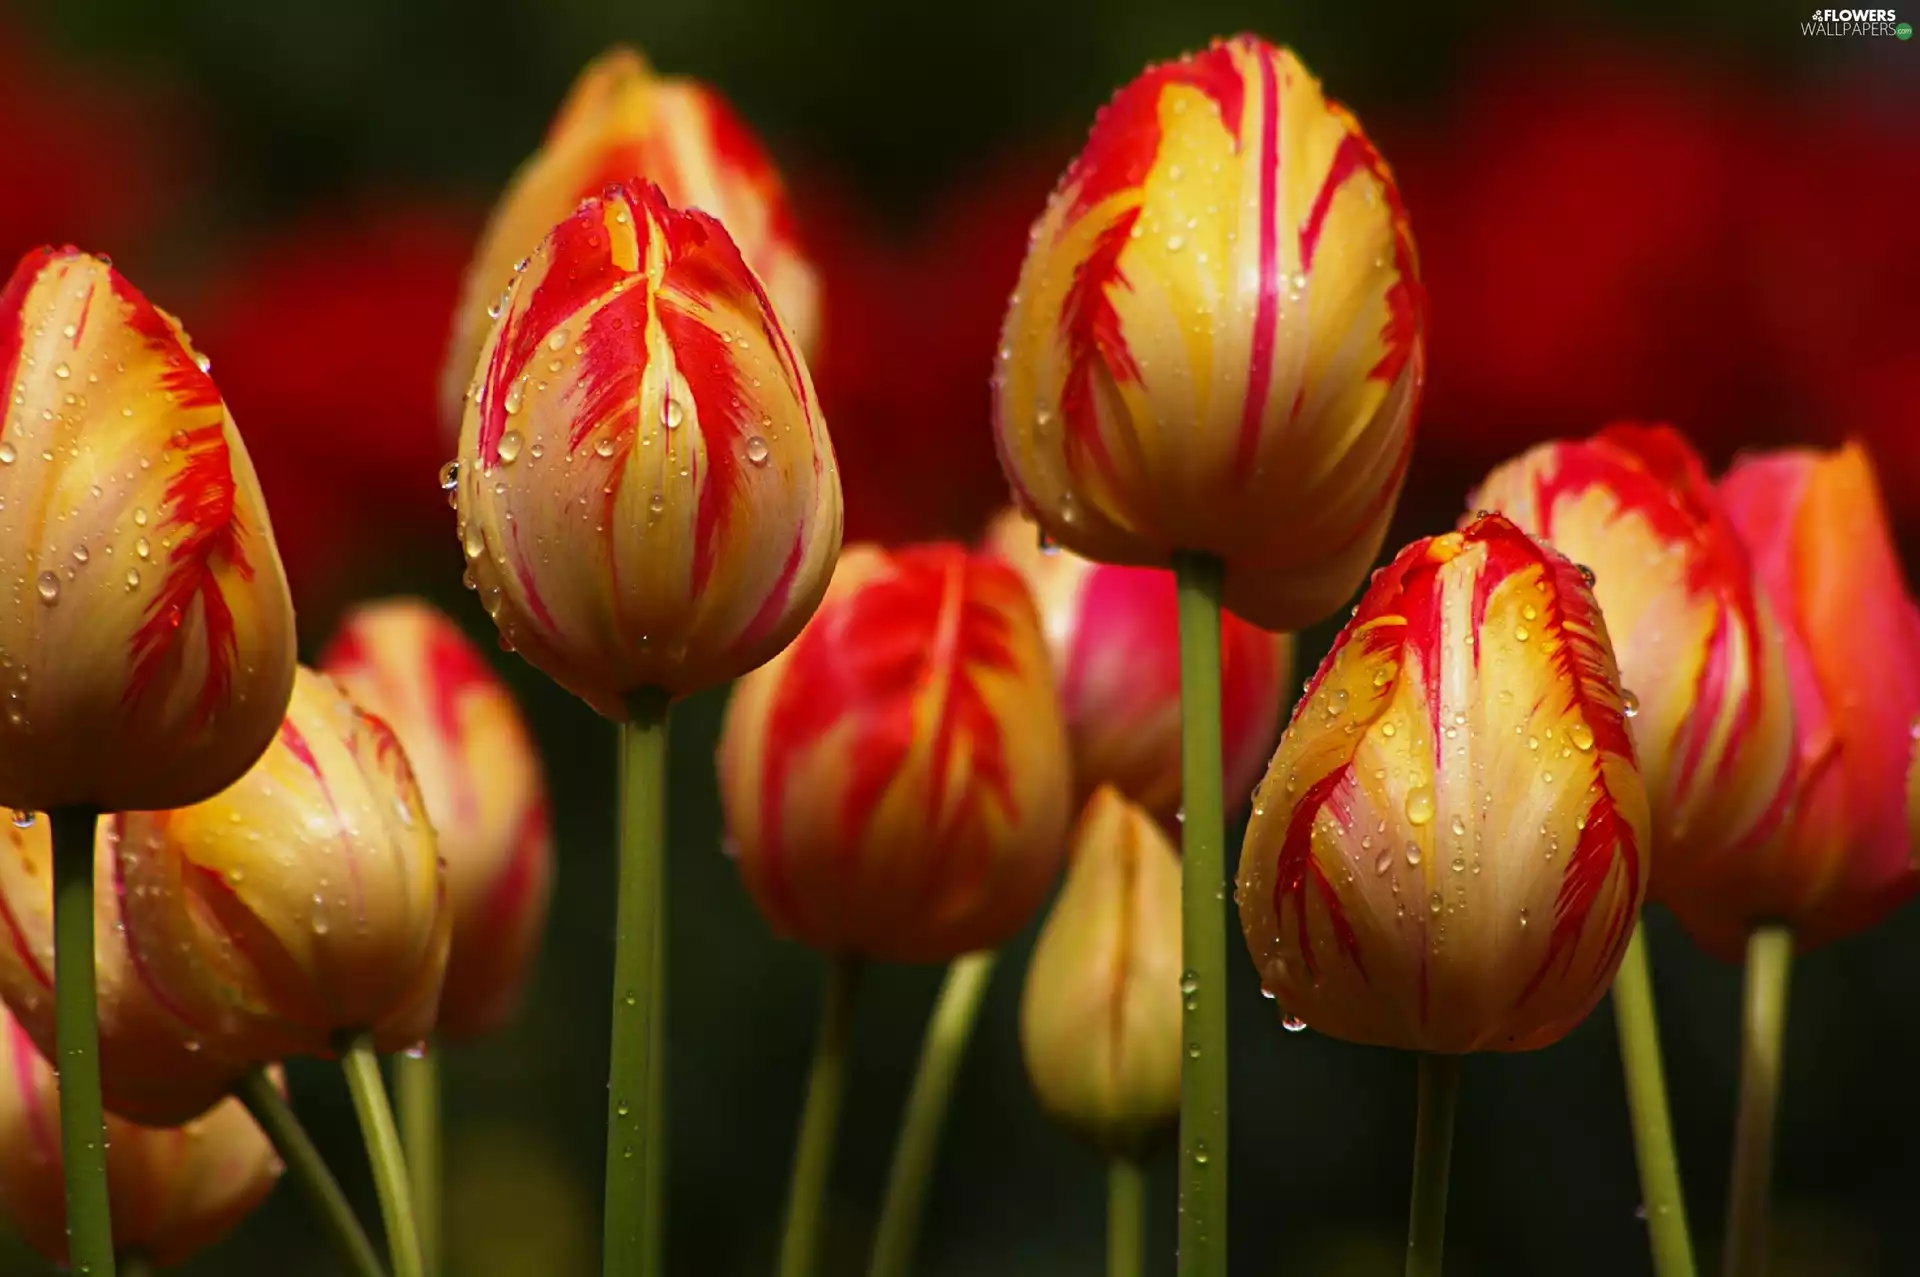 drops, water, Yellow, Tulips, red